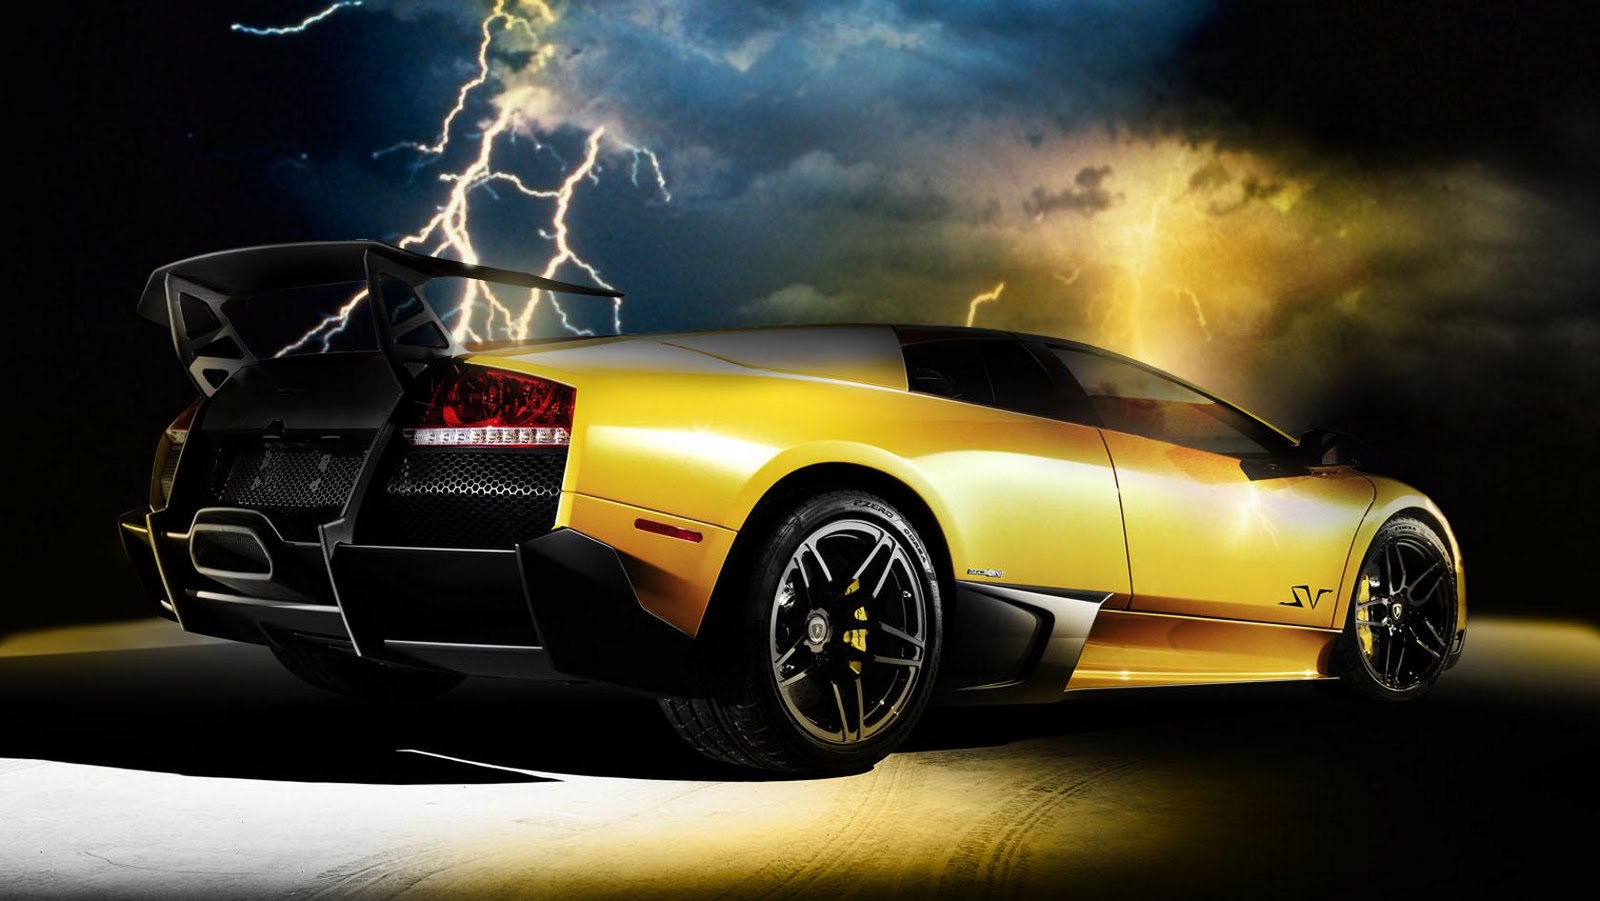 Featured image of post Diamond Gold Fire Lamborghini Wallpaper Download share or upload your own one